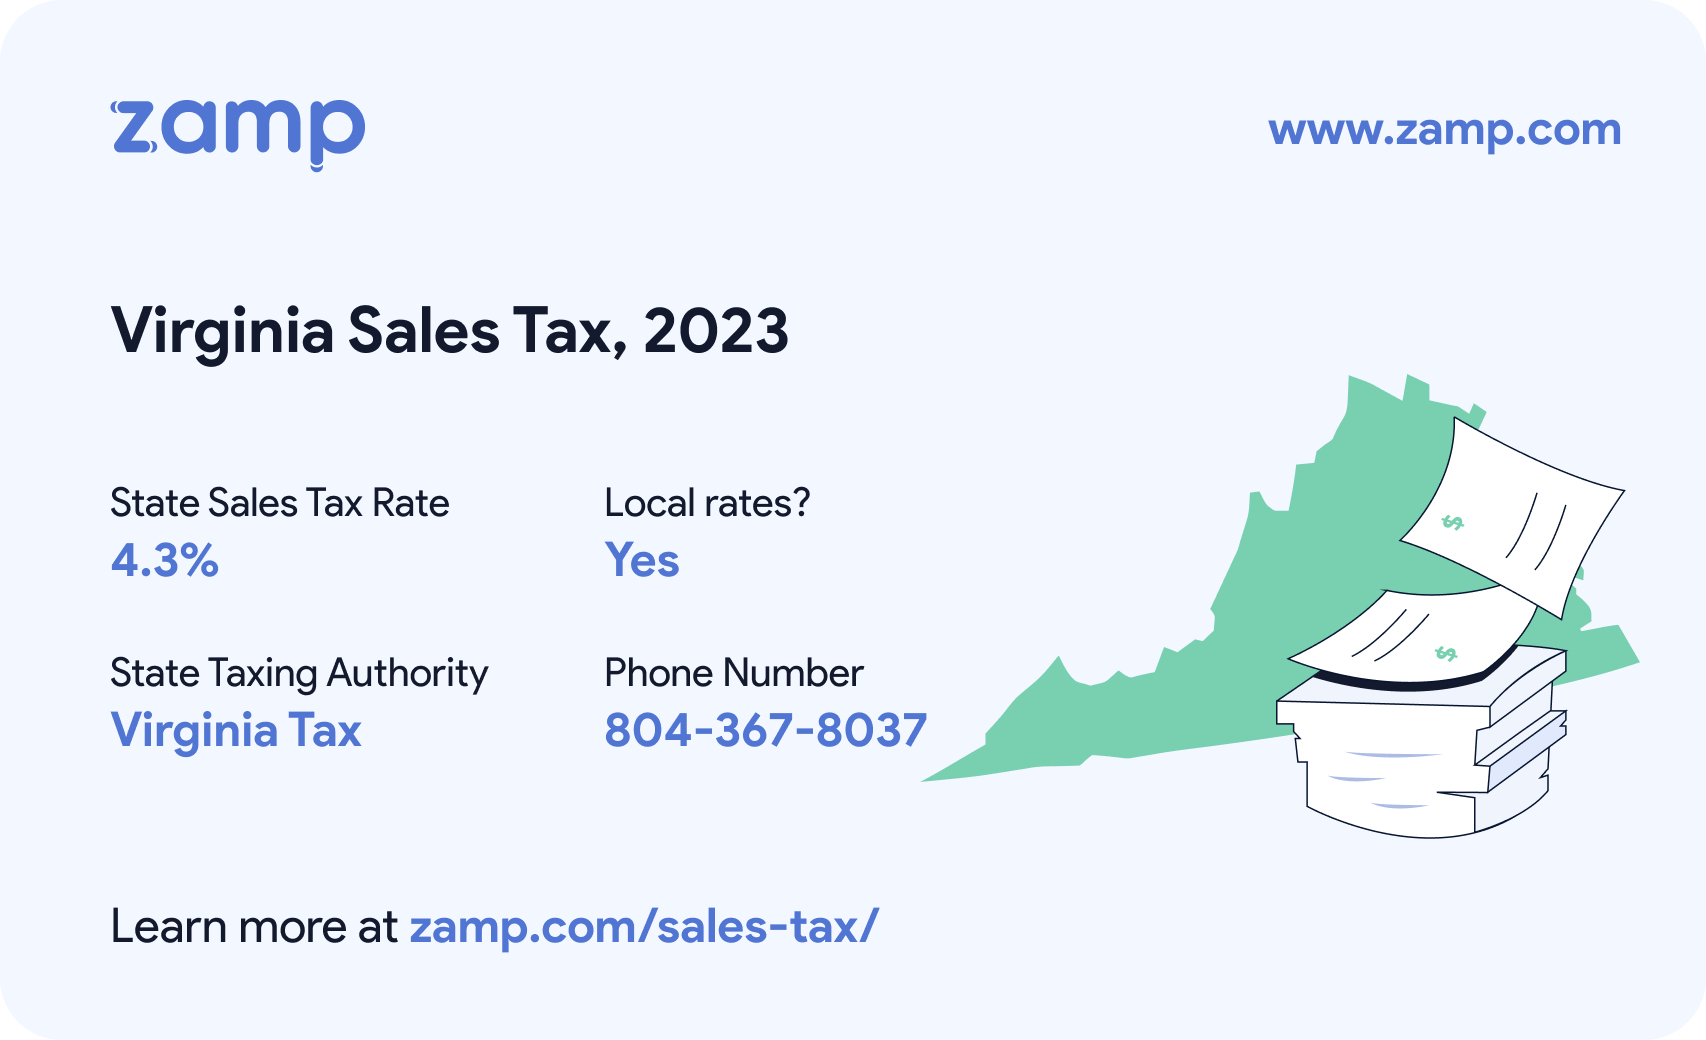 Virginia basic sales tax info for 2023 - State sales tax rate: 4.3%, Local rates? Yes; State Taxing Authority: Virginia Tax; and phone number 804-367-8037